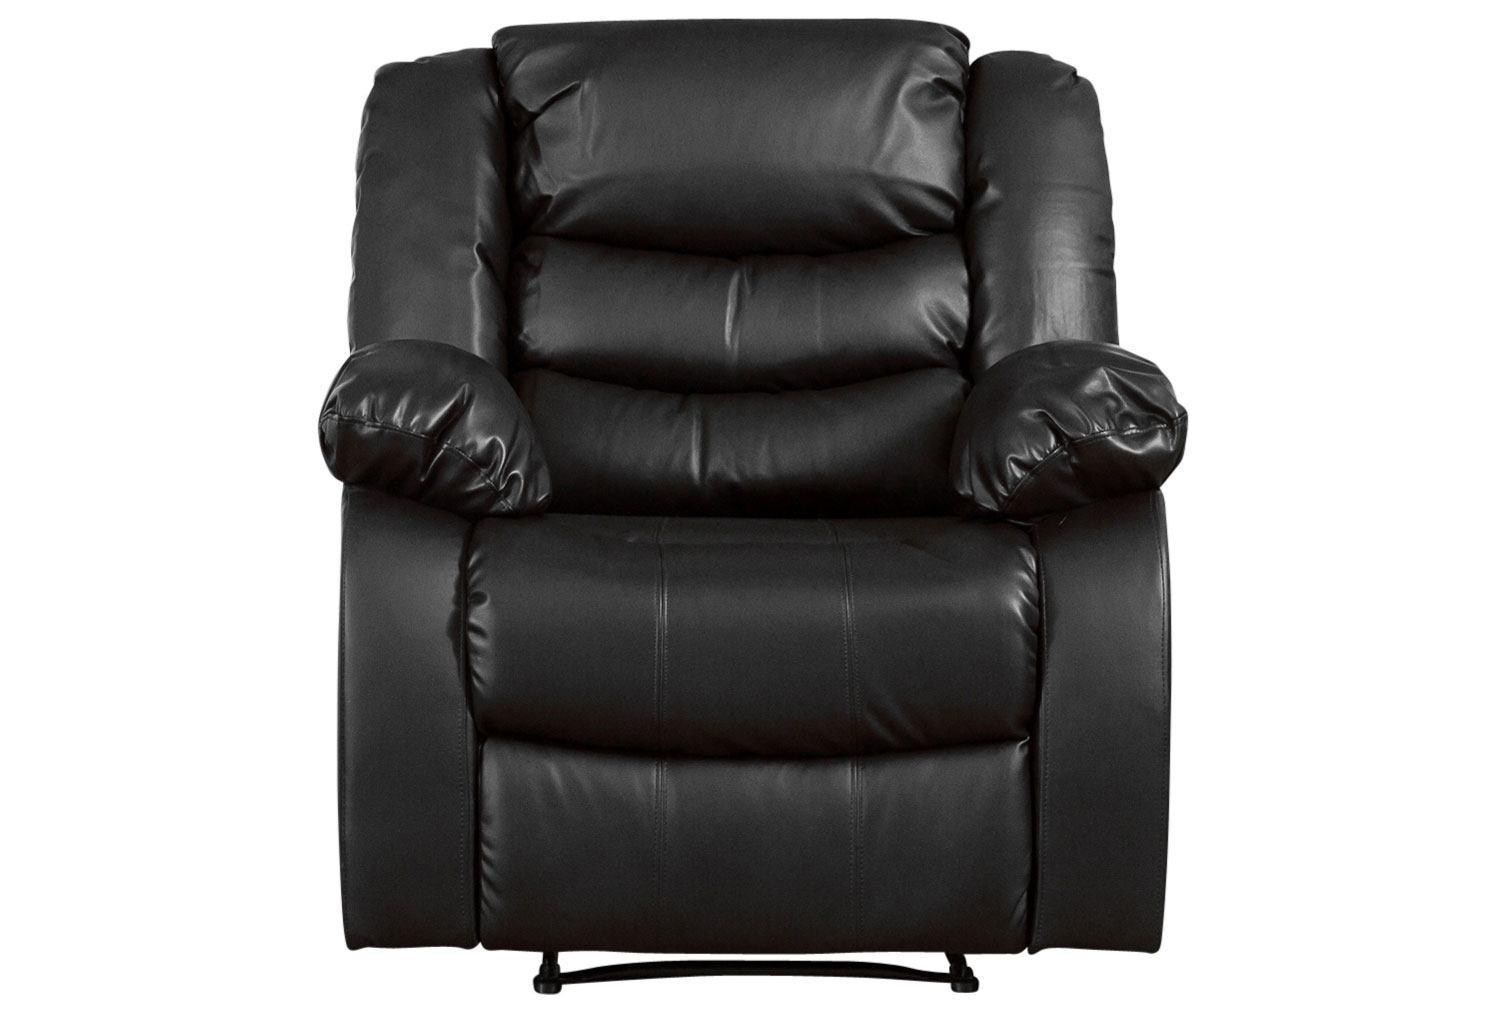 Buet Leather Recliner Office ArmOffice Chair (Black), Black